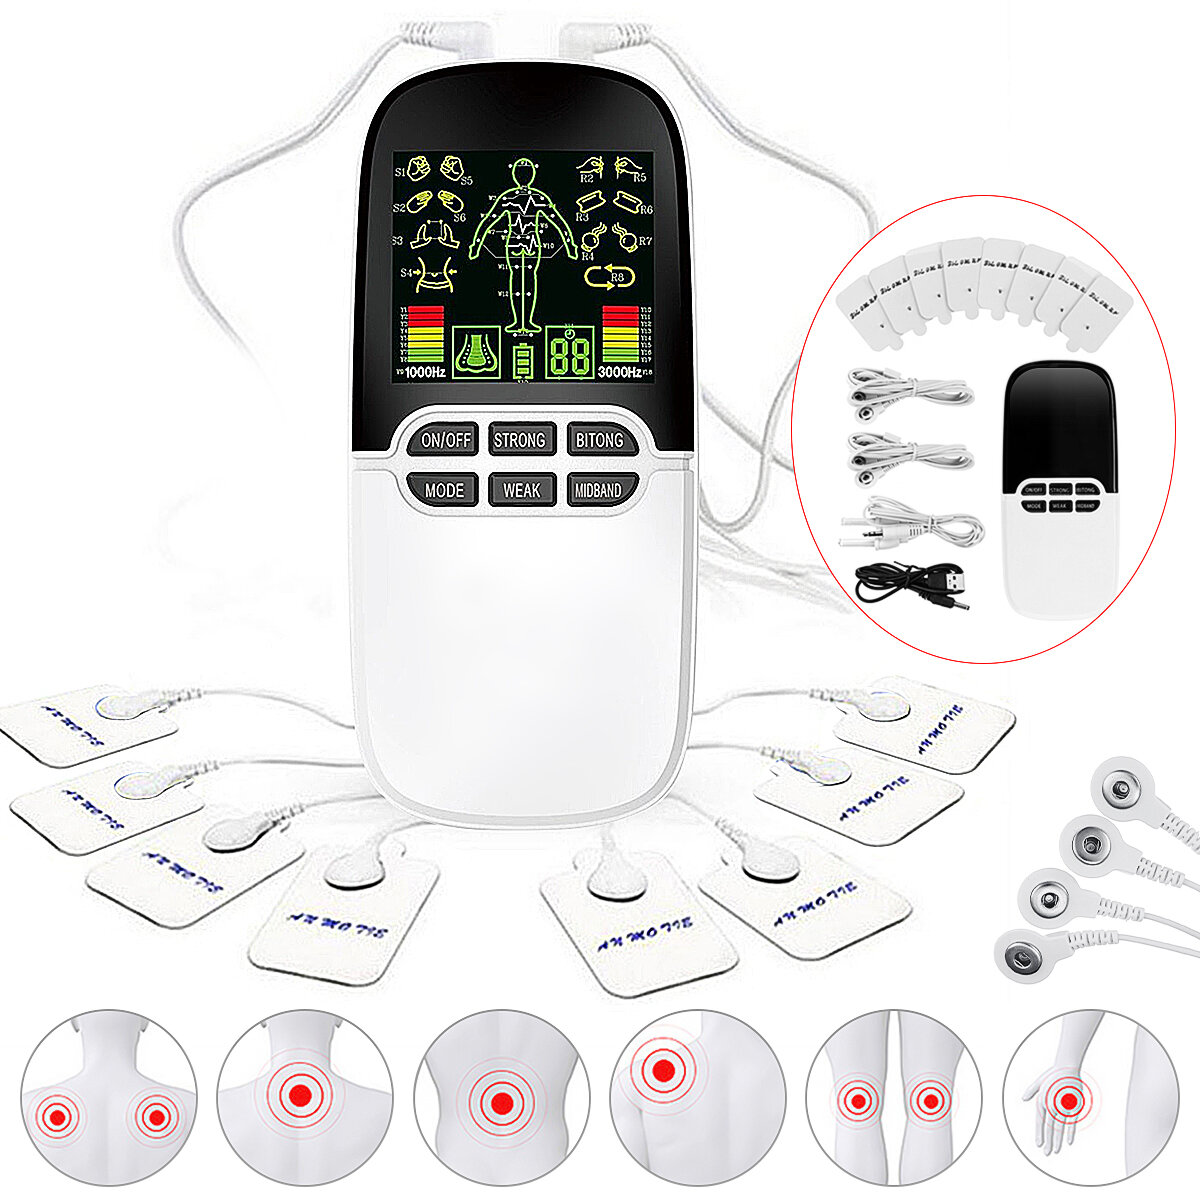 TENS Unit Electronic Pulse Meridian Massager LCD Digital Display 8 Treatment Modes Adjustment Neck S